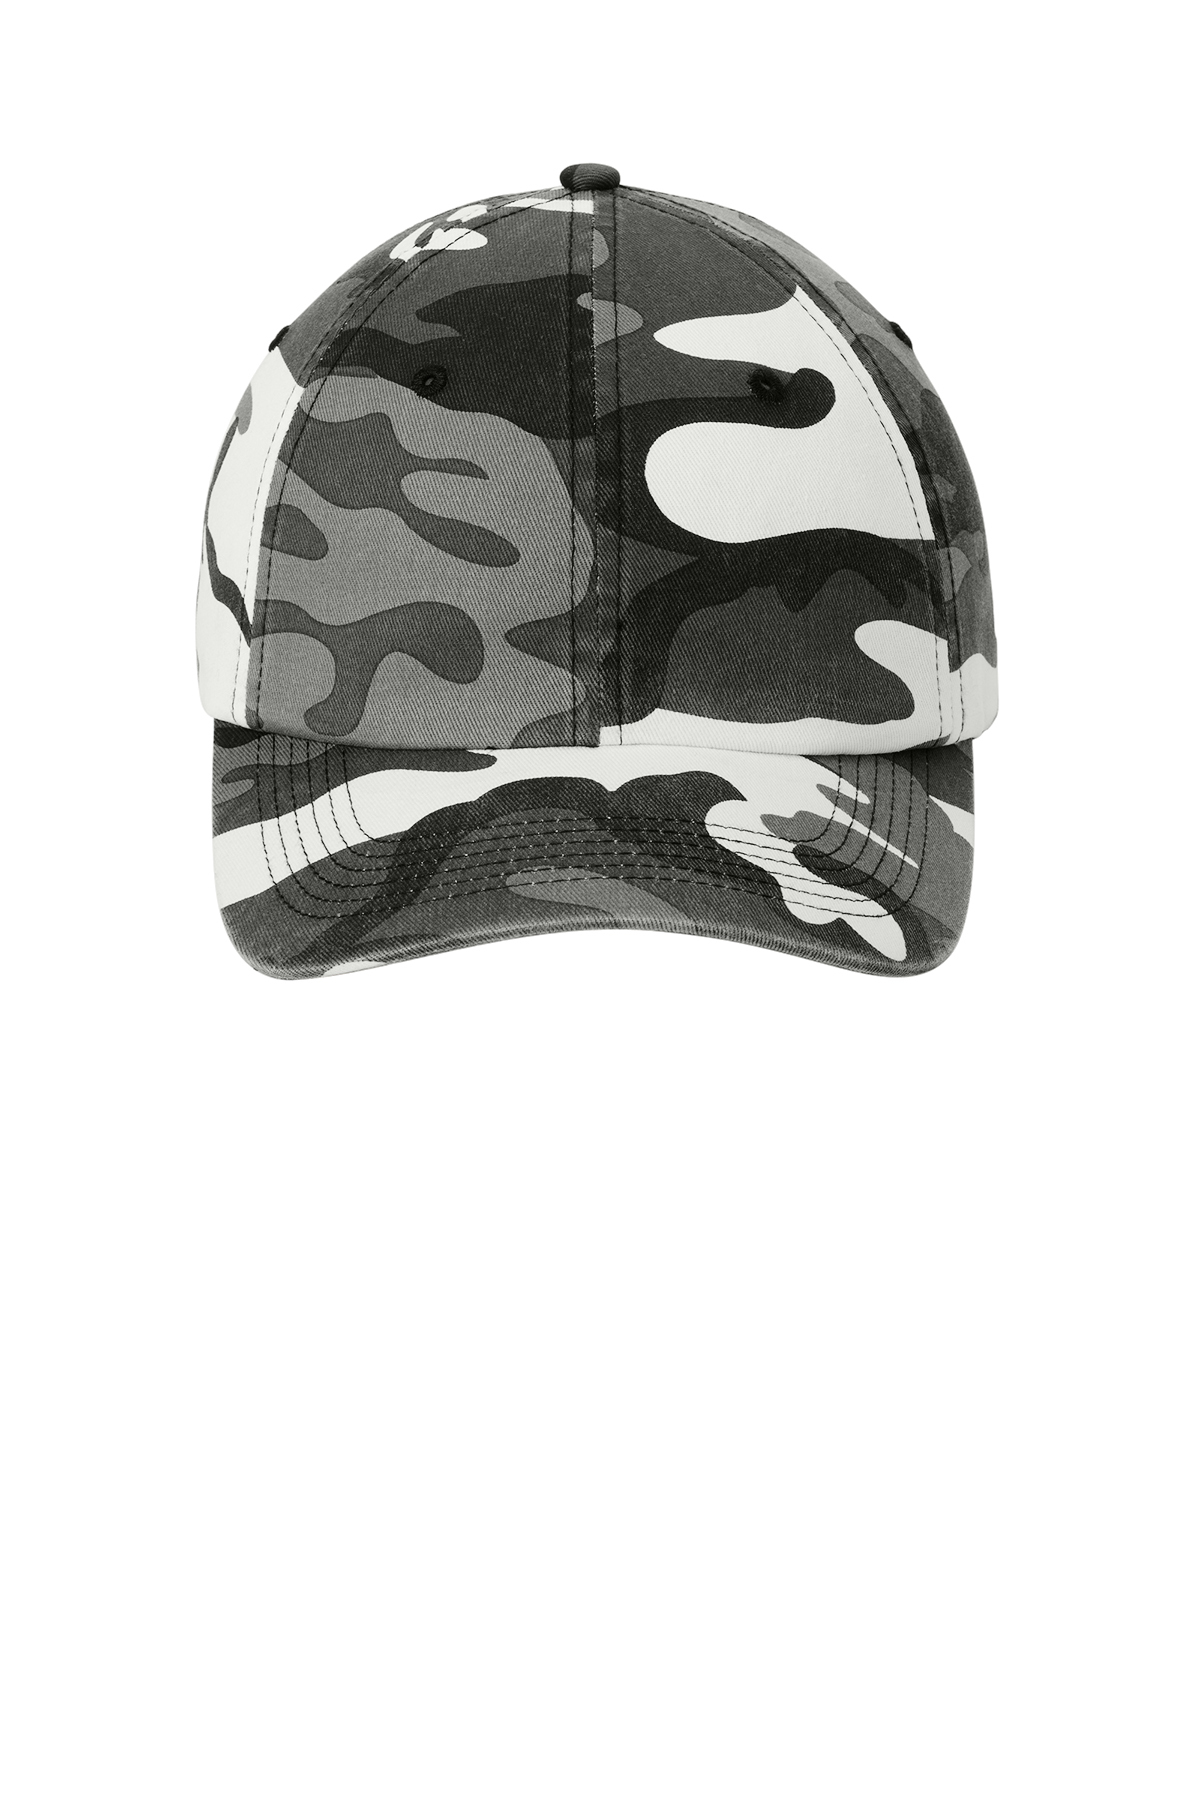 Port Authority Camouflage Cap, Product